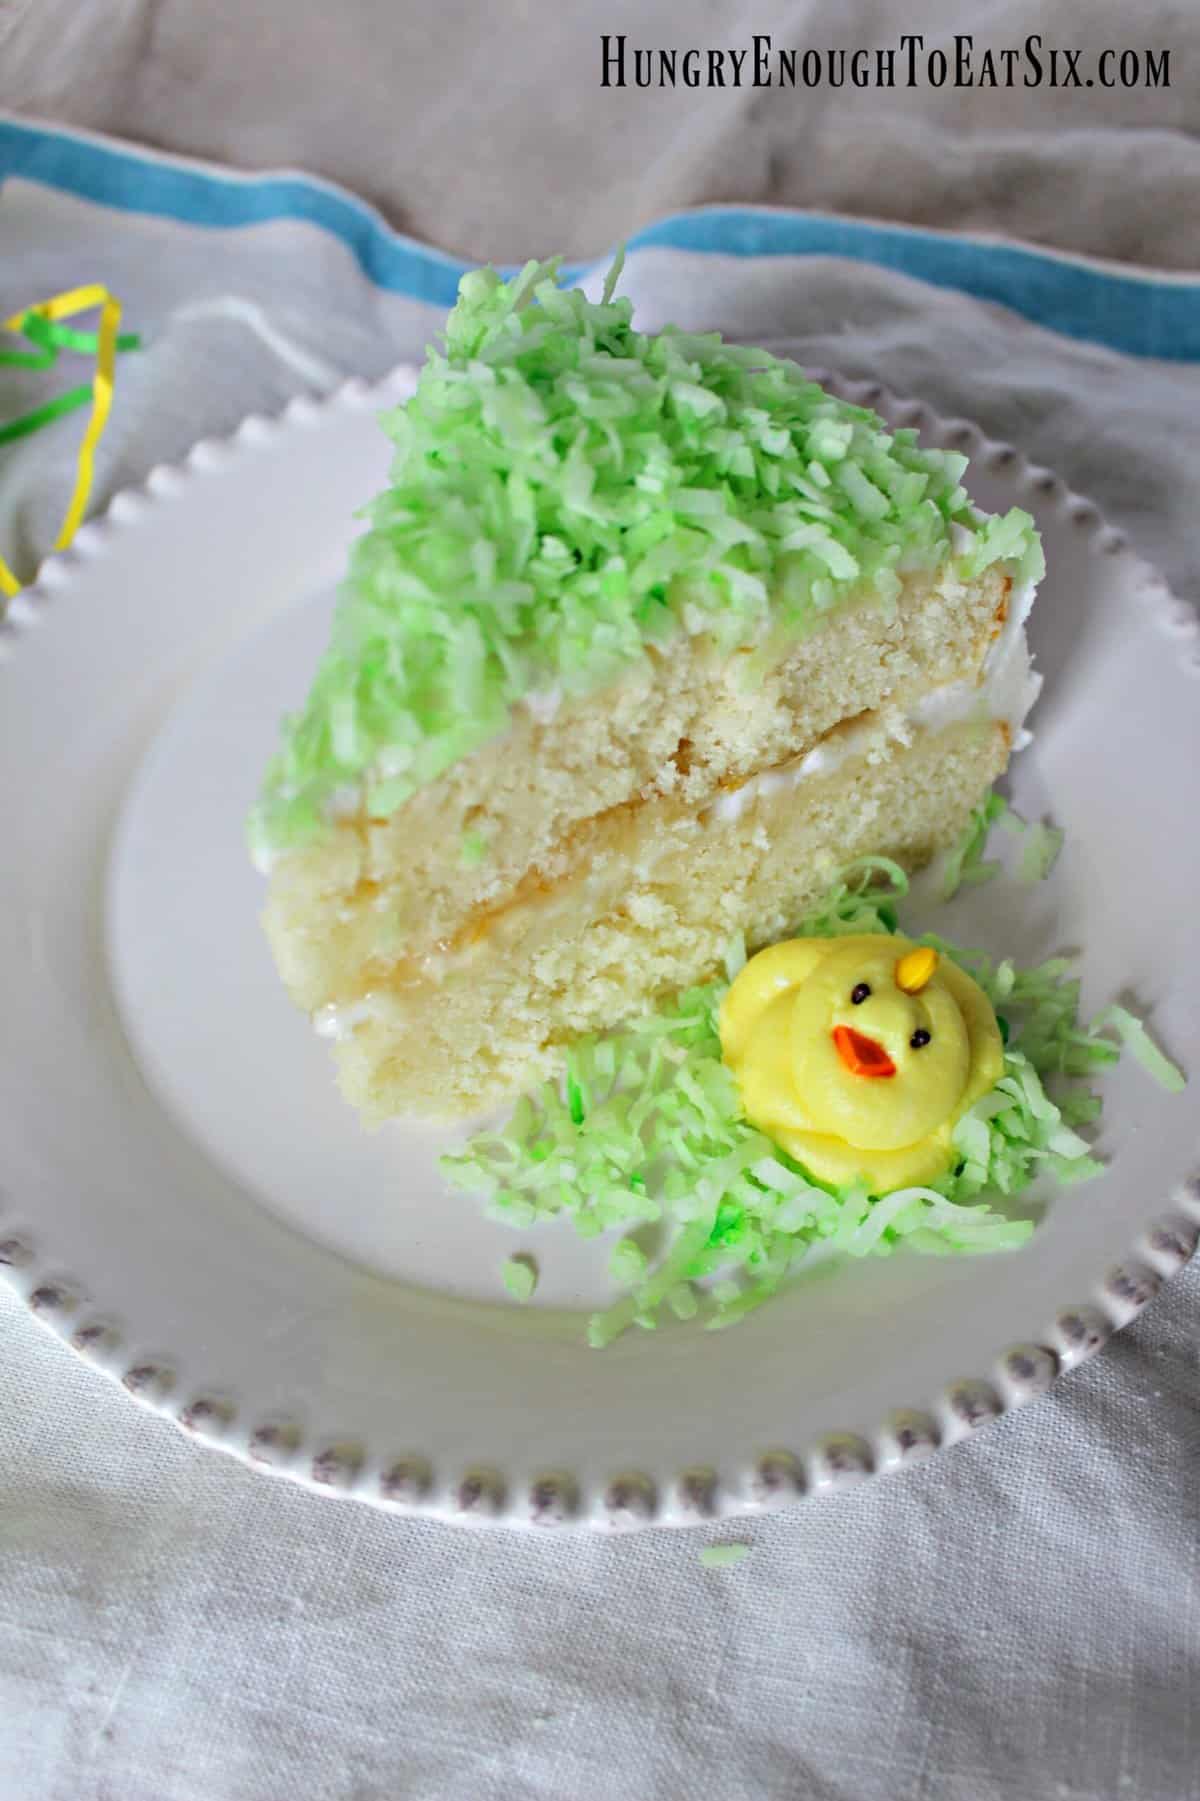 Slice of white layer cake with green coconut on top.